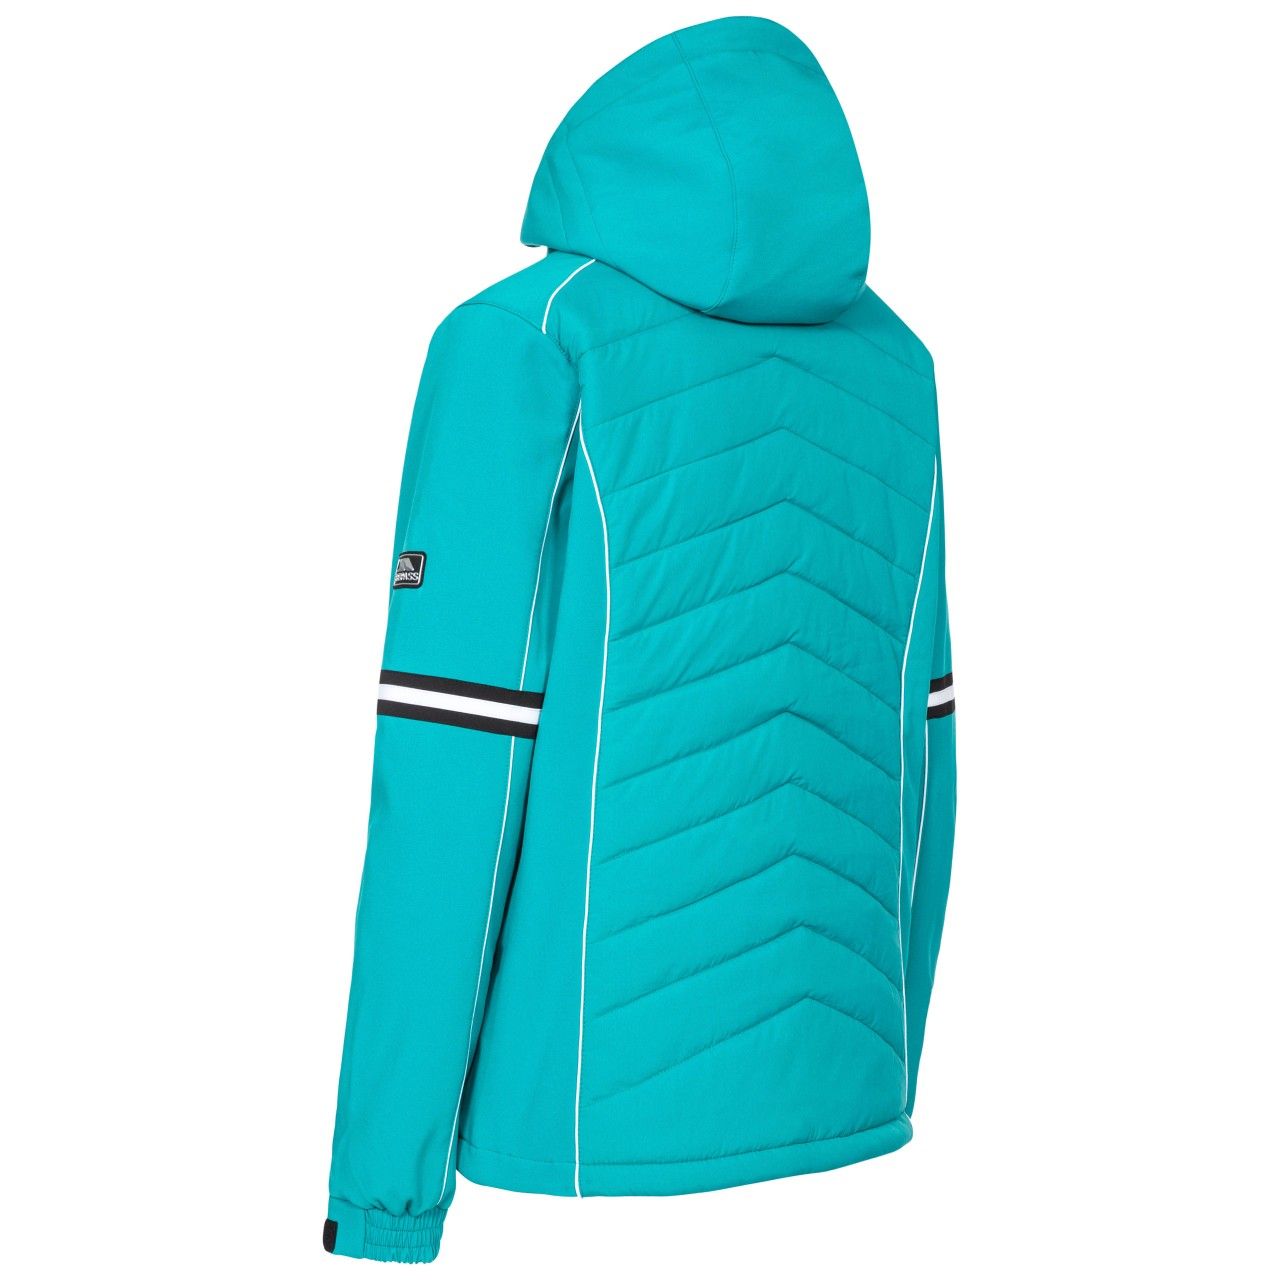 Padded. Adjustable zip off hood. 2 zip pockets, 1 zip sleeve pocket. Contrast trims. Inner storm flap. Adjustable cuffs. Hem drawcord. Snowskirt. Windproof. Comfort stretch. Shell: 100% Polyester Pongee, AC coated, Softshell: 96% Polyester/4% Elastane, Lining: 100% Polyester, Filling: 100% Polyester. Trespass Womens Chest Sizing (approx): XS/8 - 32in/81cm, S/10 - 34in/86cm, M/12 - 36in/91.4cm, L/14 - 38in/96.5cm, XL/16 - 40in/101.5cm, XXL/18 - 42in/106.5cm.